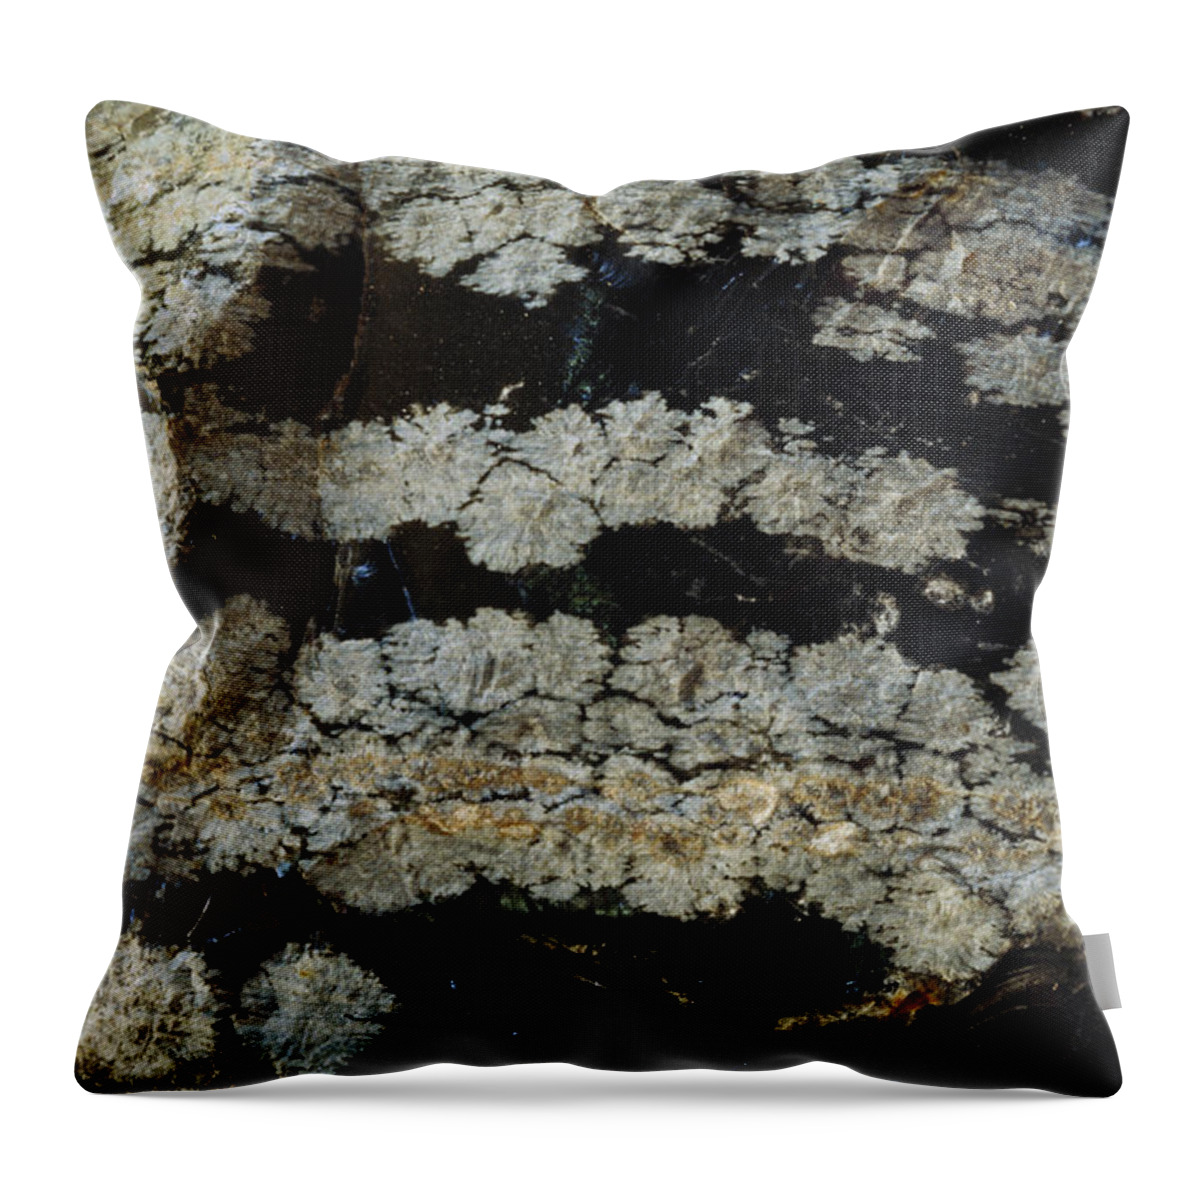 Mineral Throw Pillow featuring the photograph Volcanic Rock by David Wasserman